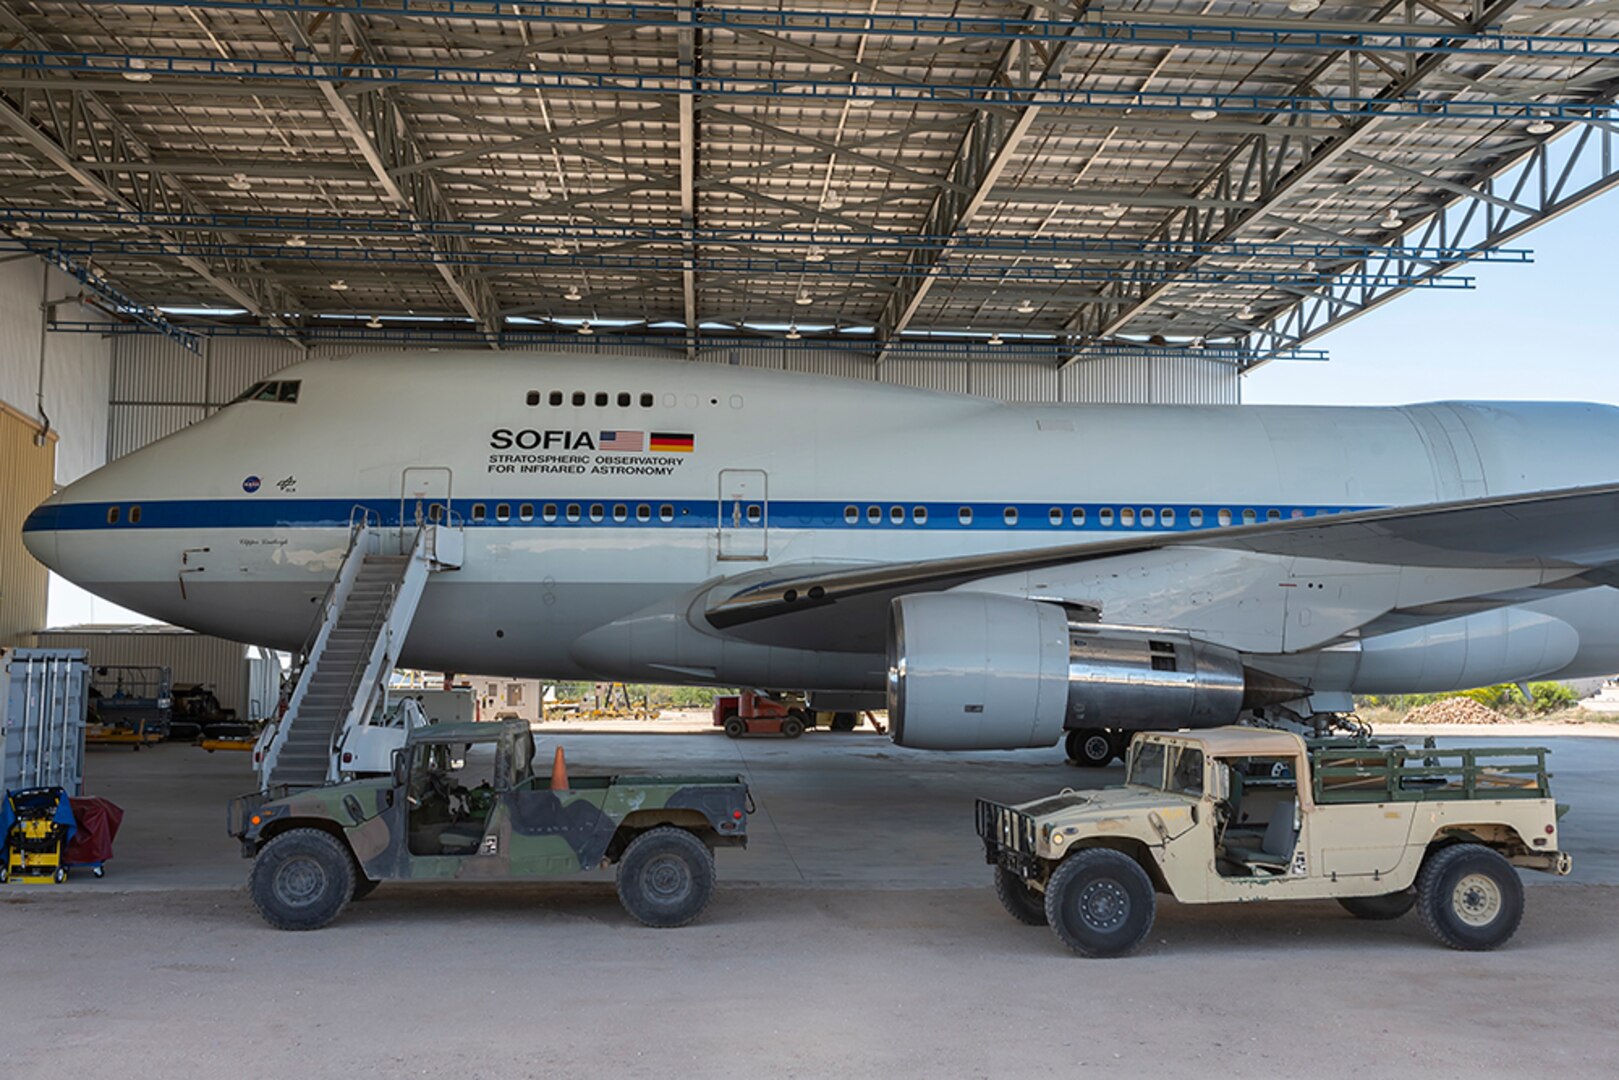 A Boeing 747 and a Humvee are parked in a hangar in the desert.